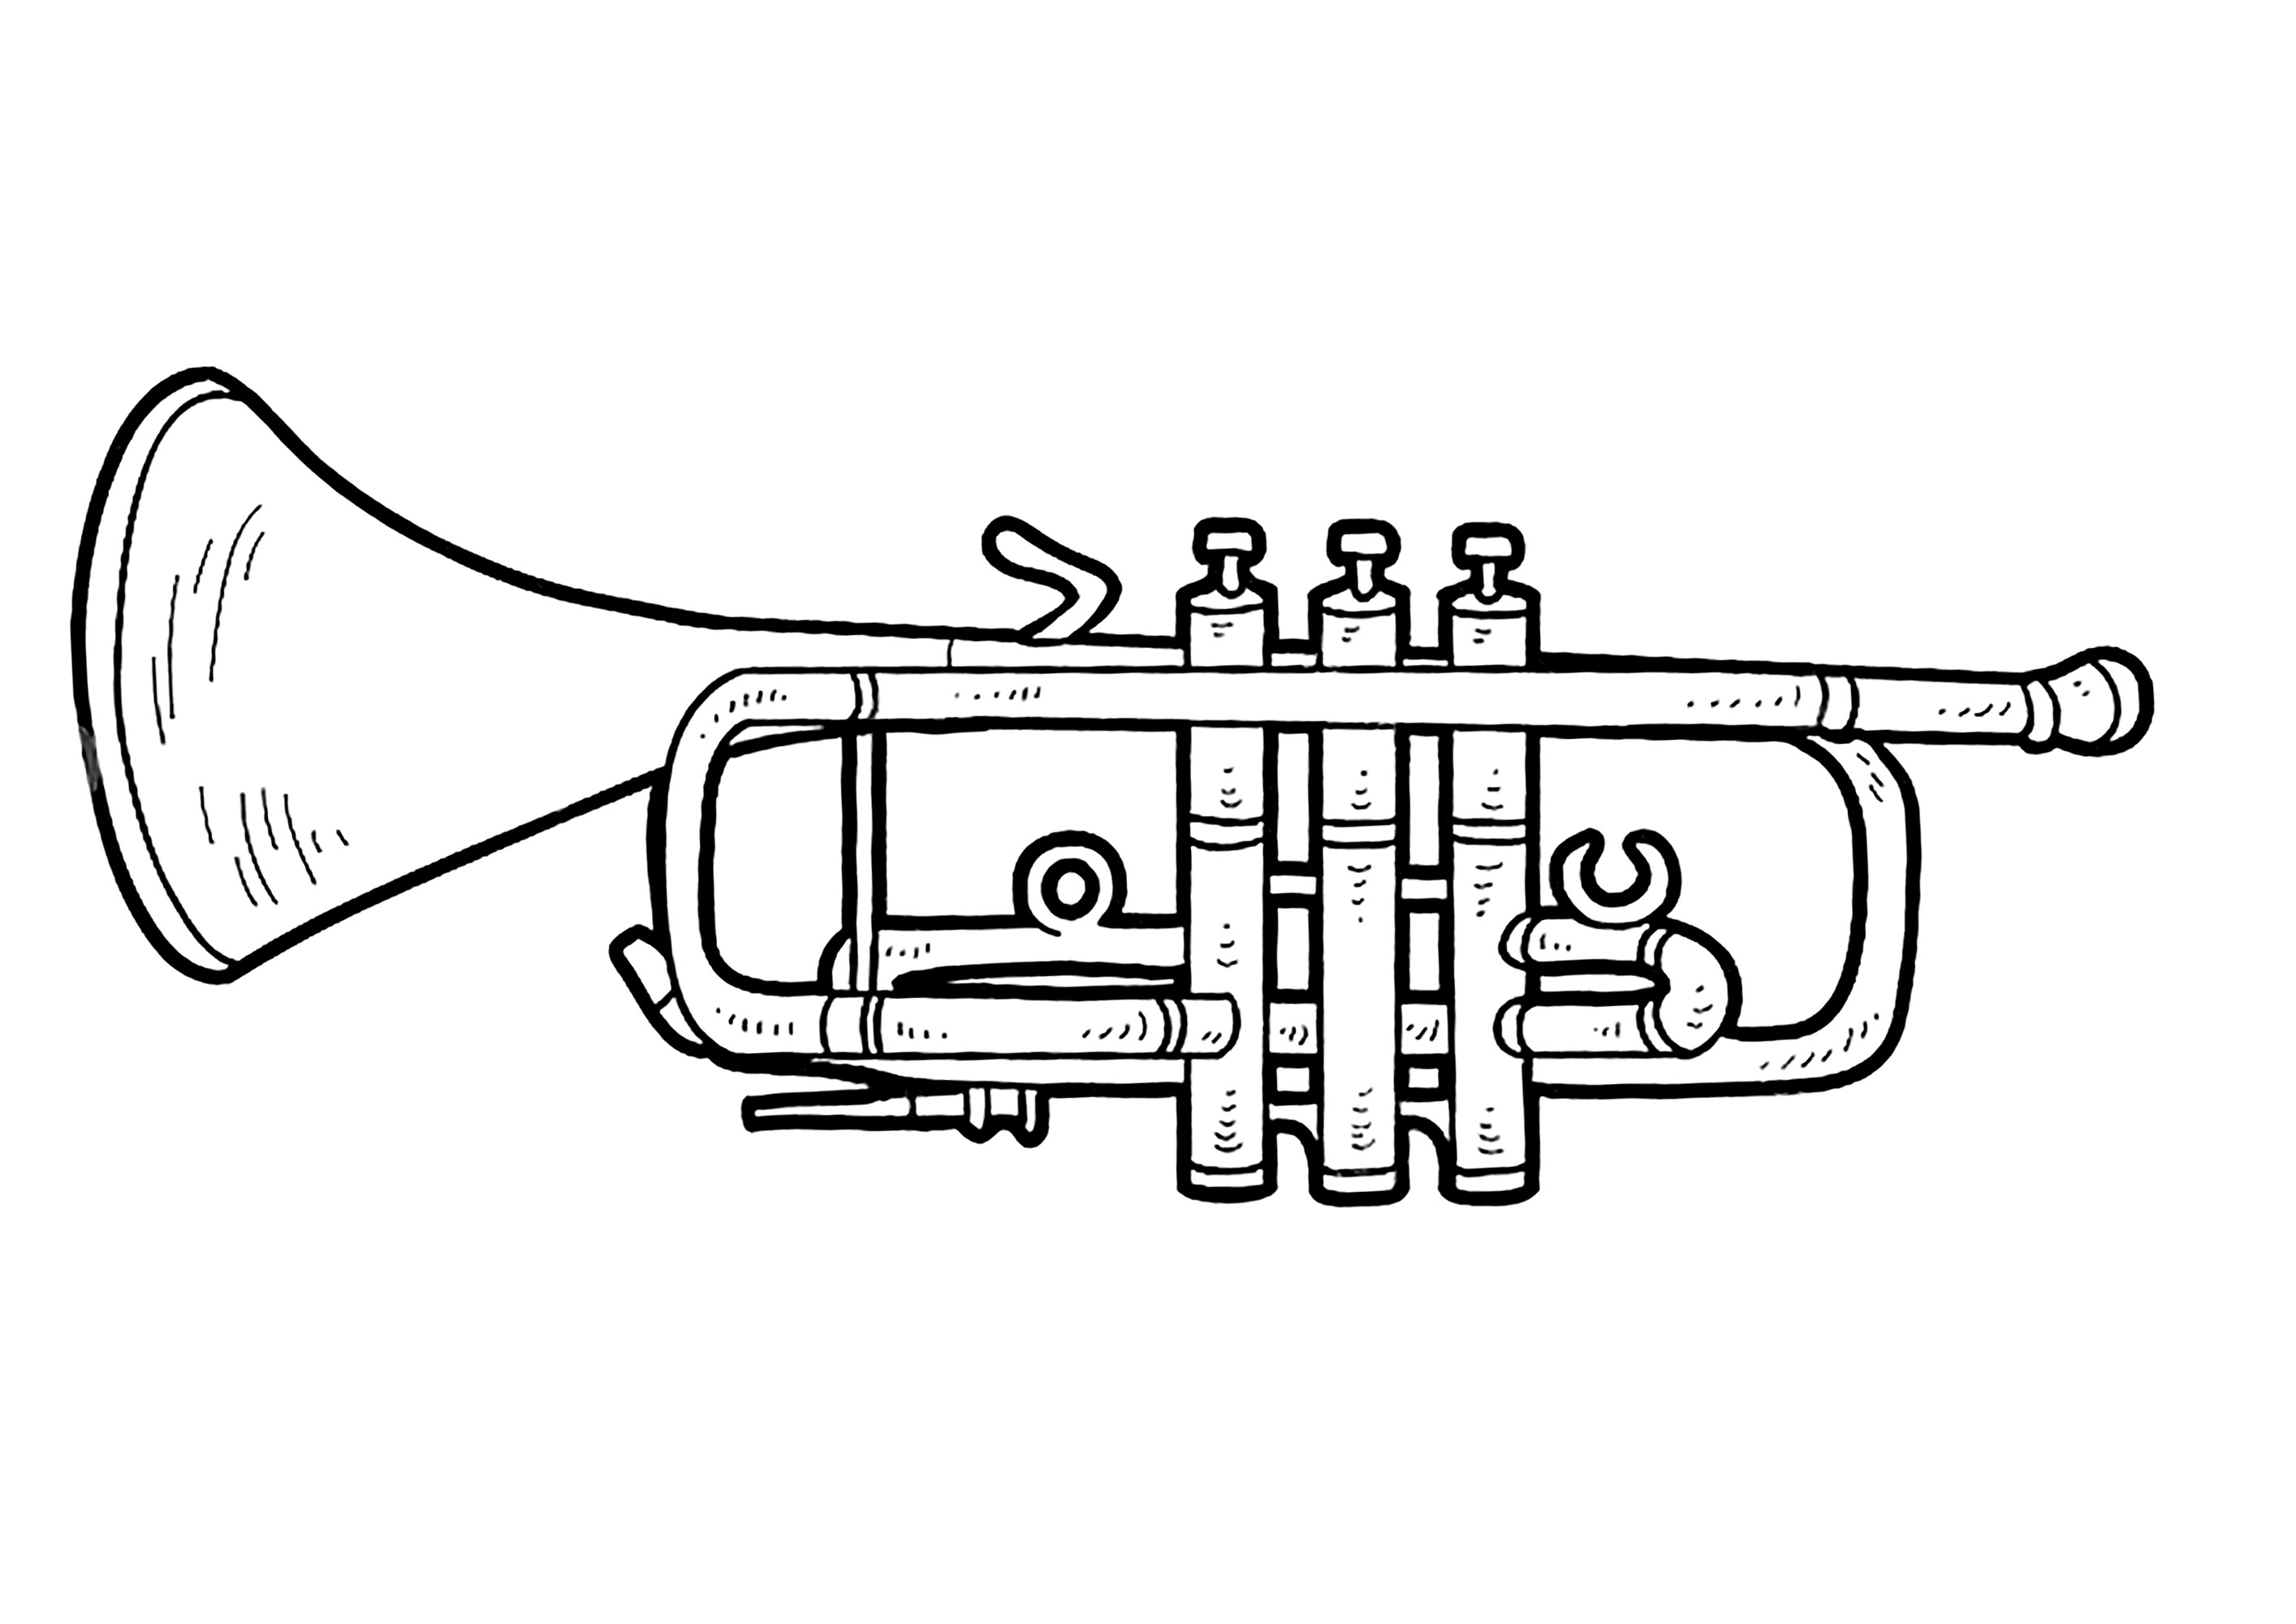 Coloring page of a trumpet